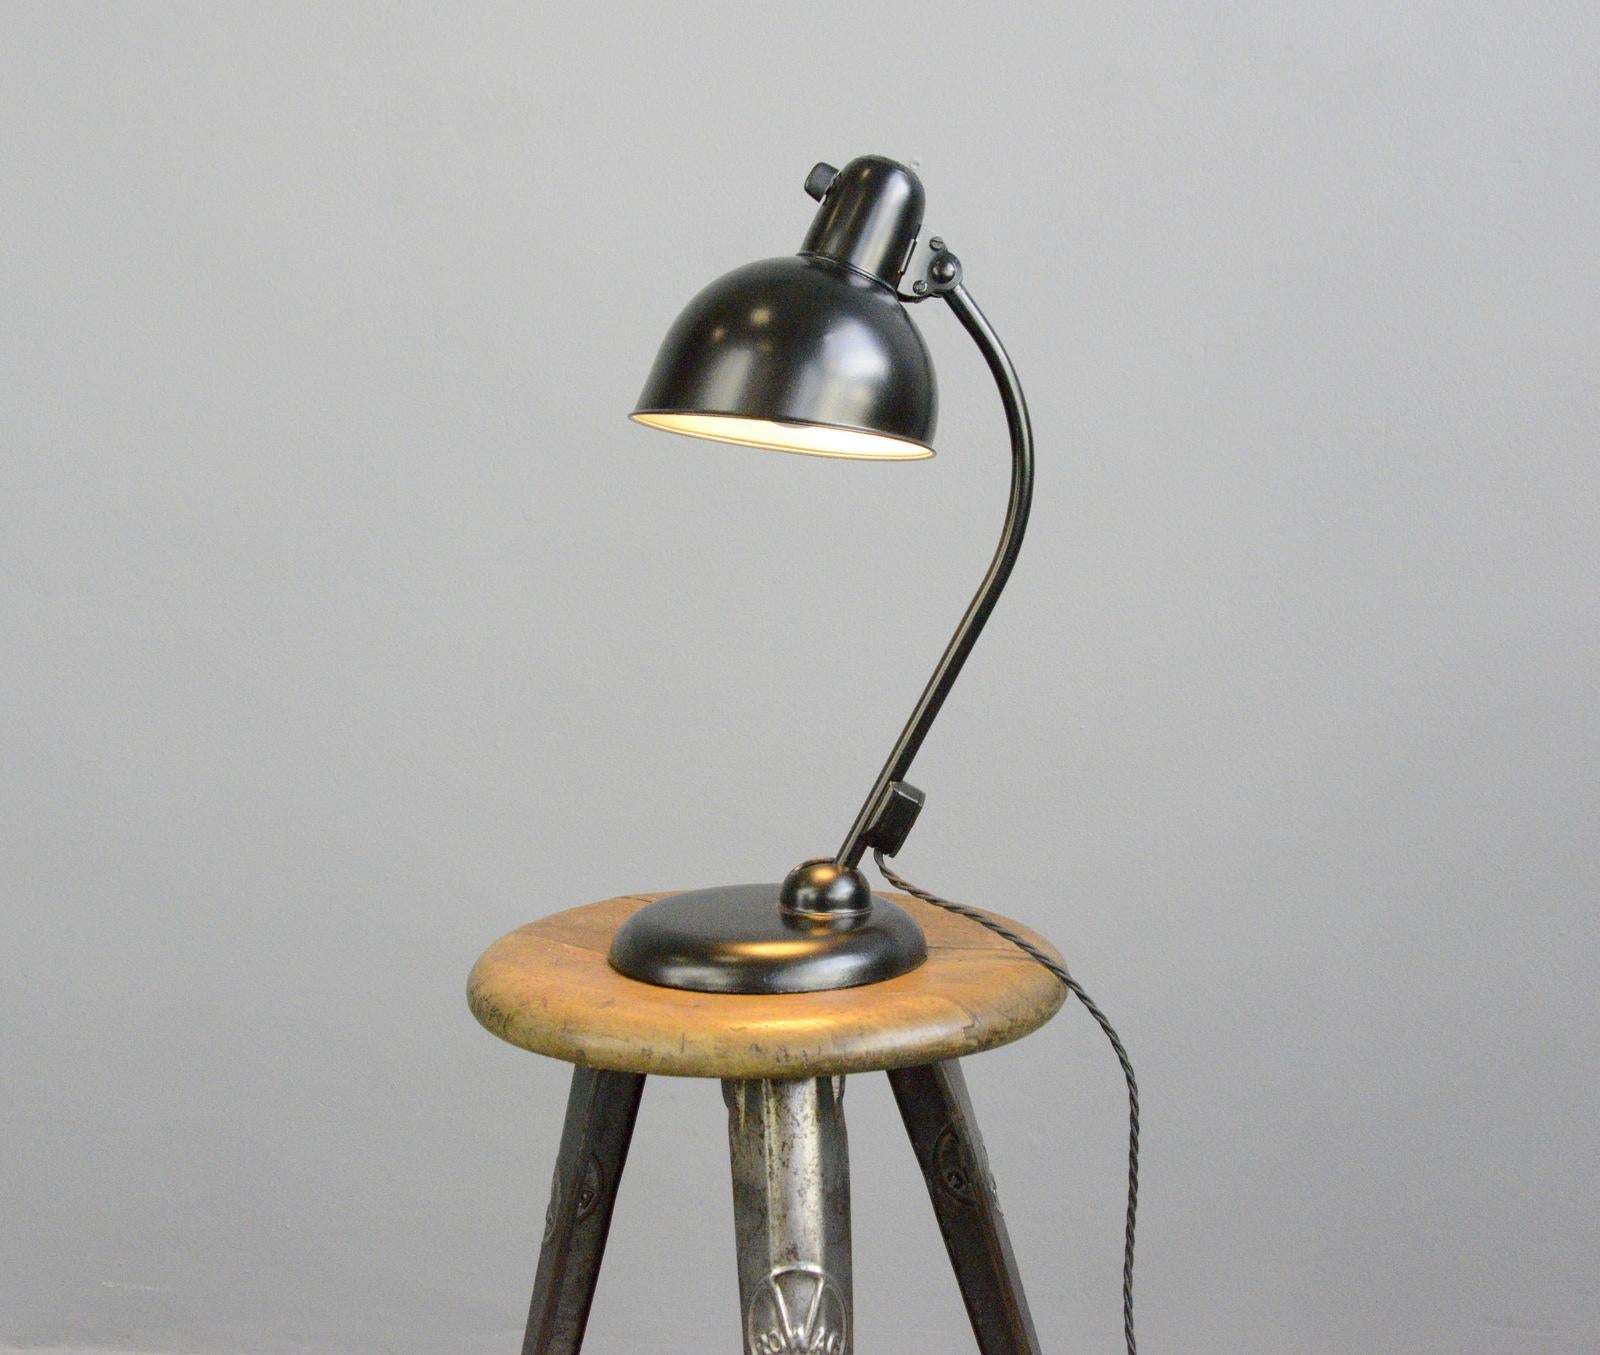 Table lamp by Kaiser Jdell, circa 1930s

- Steel shade with relief Kaiser Jdell branding
- On/Off switch on the base
- Takes E27 fitting bulbs
- Adjustable arm and shade
- Designed by Christian Dell
- German ~ 1930s
- Measures: 46cm tall x